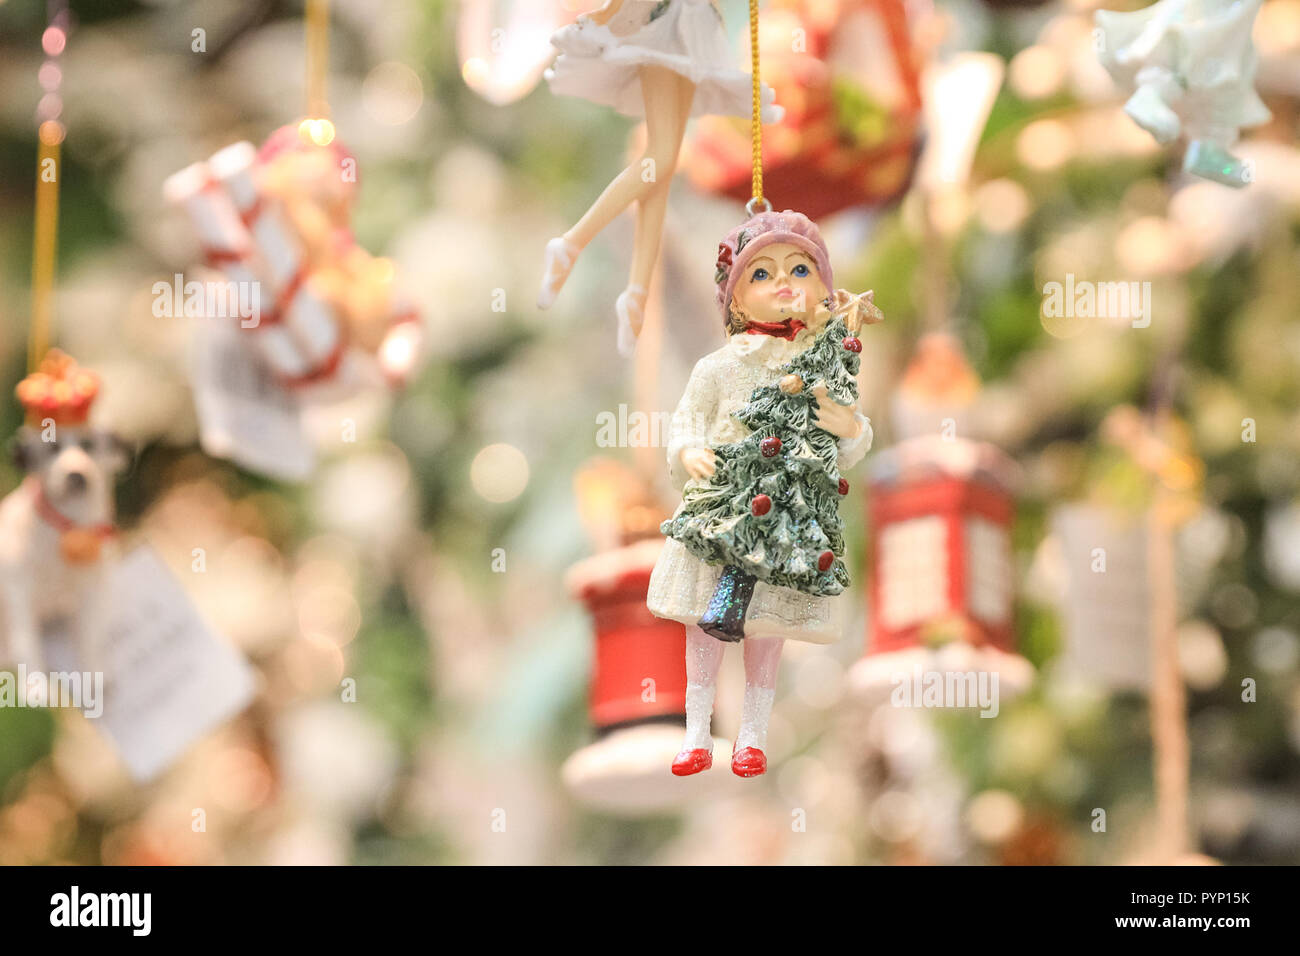 Olympia Exhibition Centre London Uk 29th Oct 2018 Christmas Tree Figurines From The Festive Dresser Company